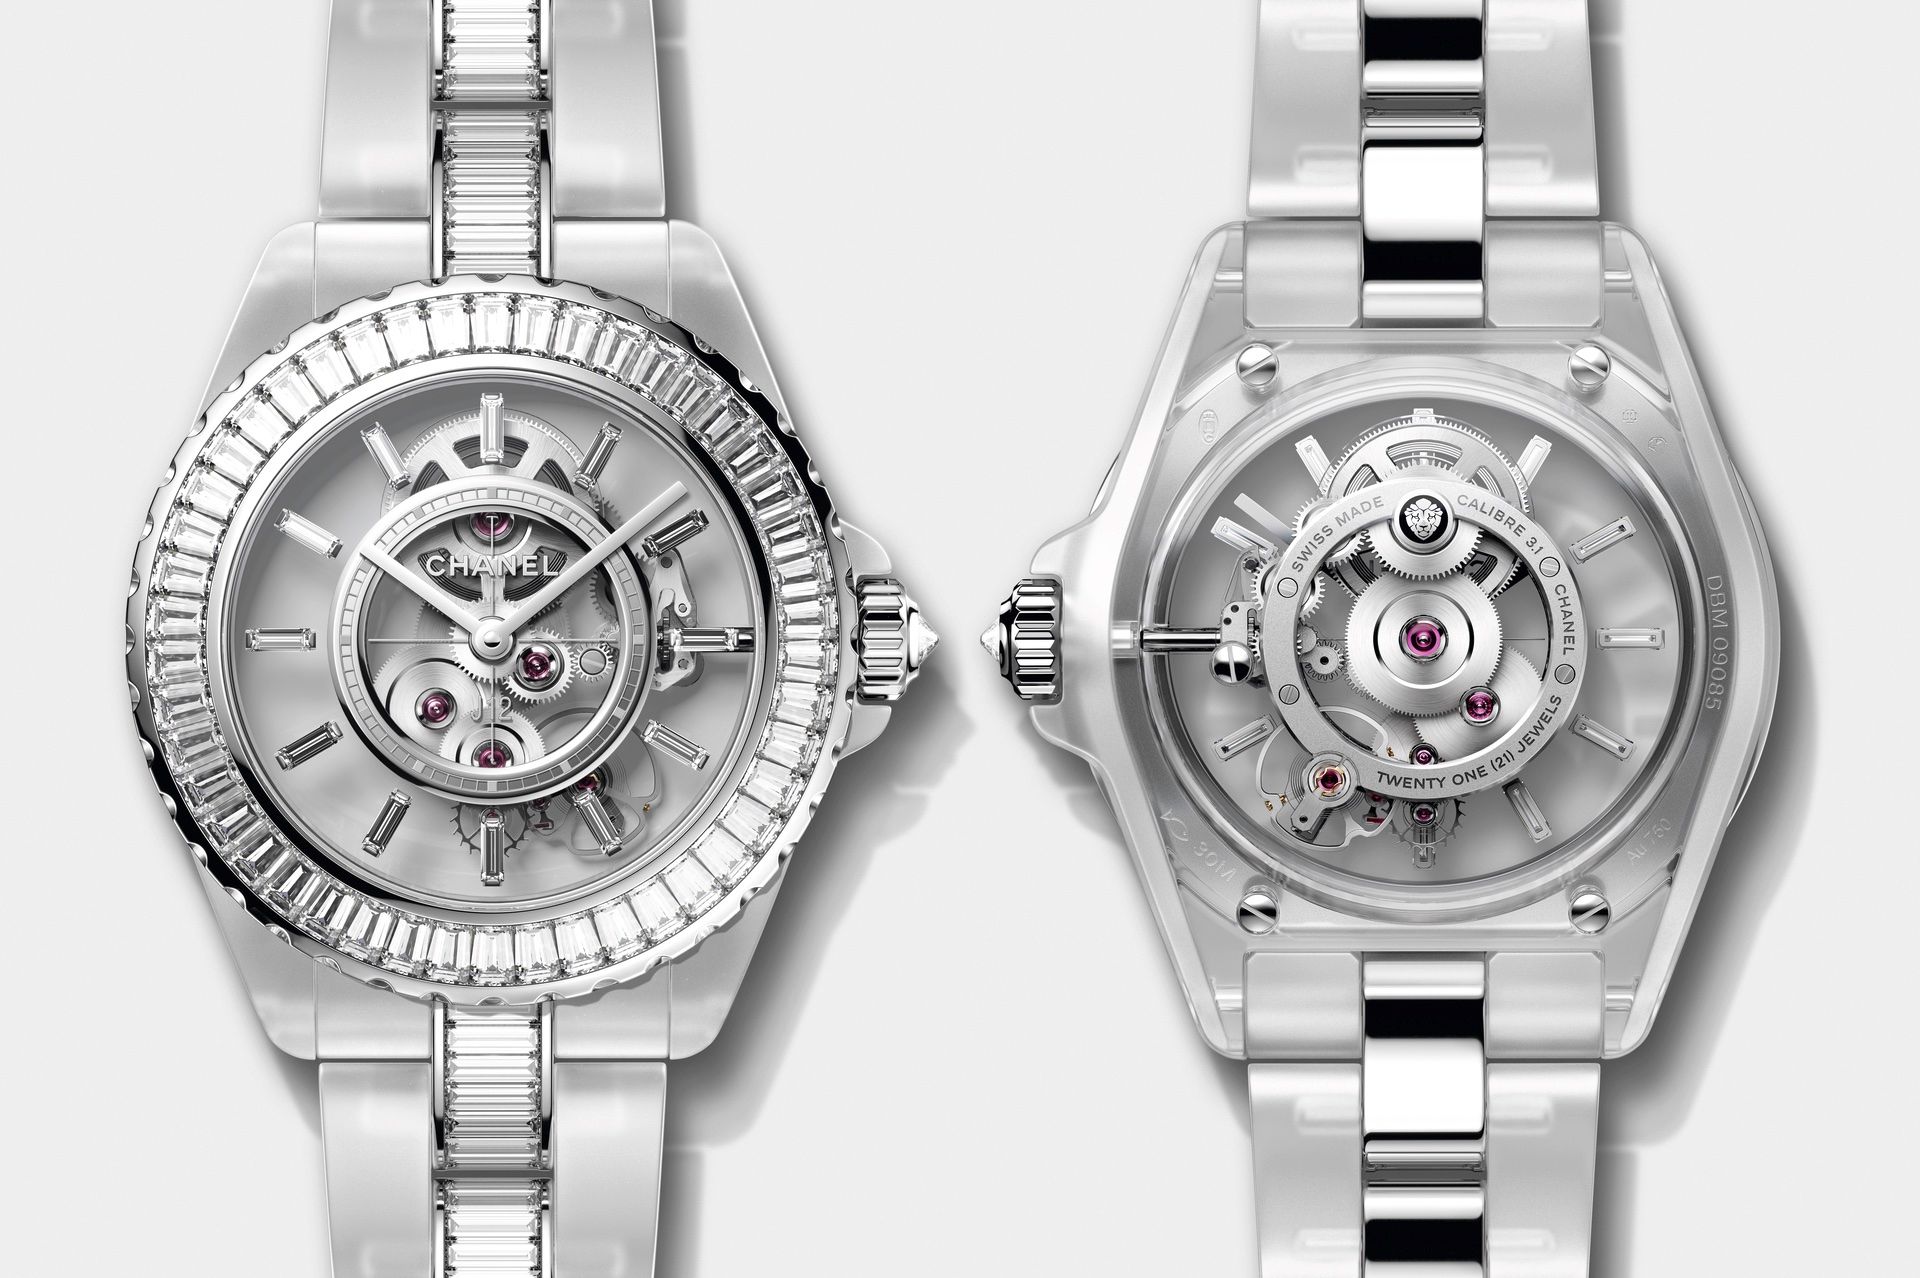 With their latest, Chanel demonstrates undeniable watchmaking